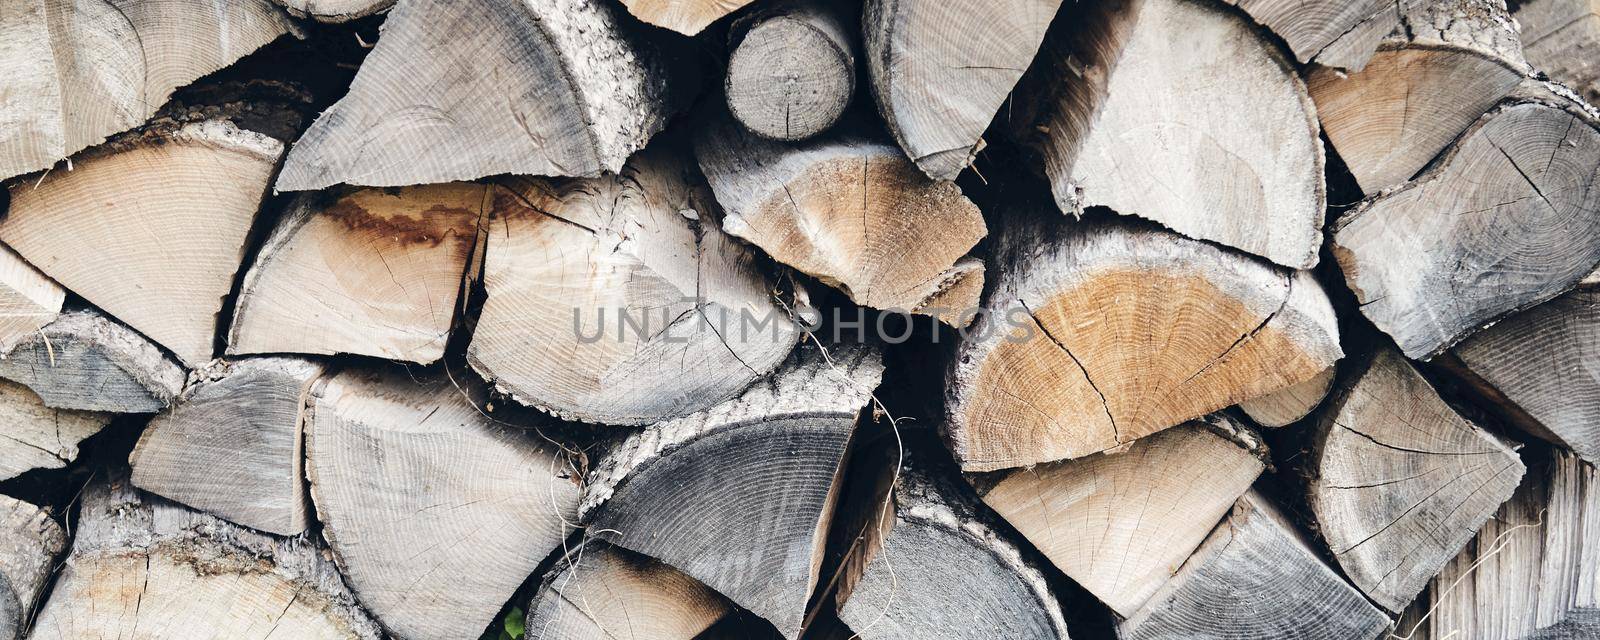 Logs in a sawmill yard. Stacks of woodpile firewood texture background.